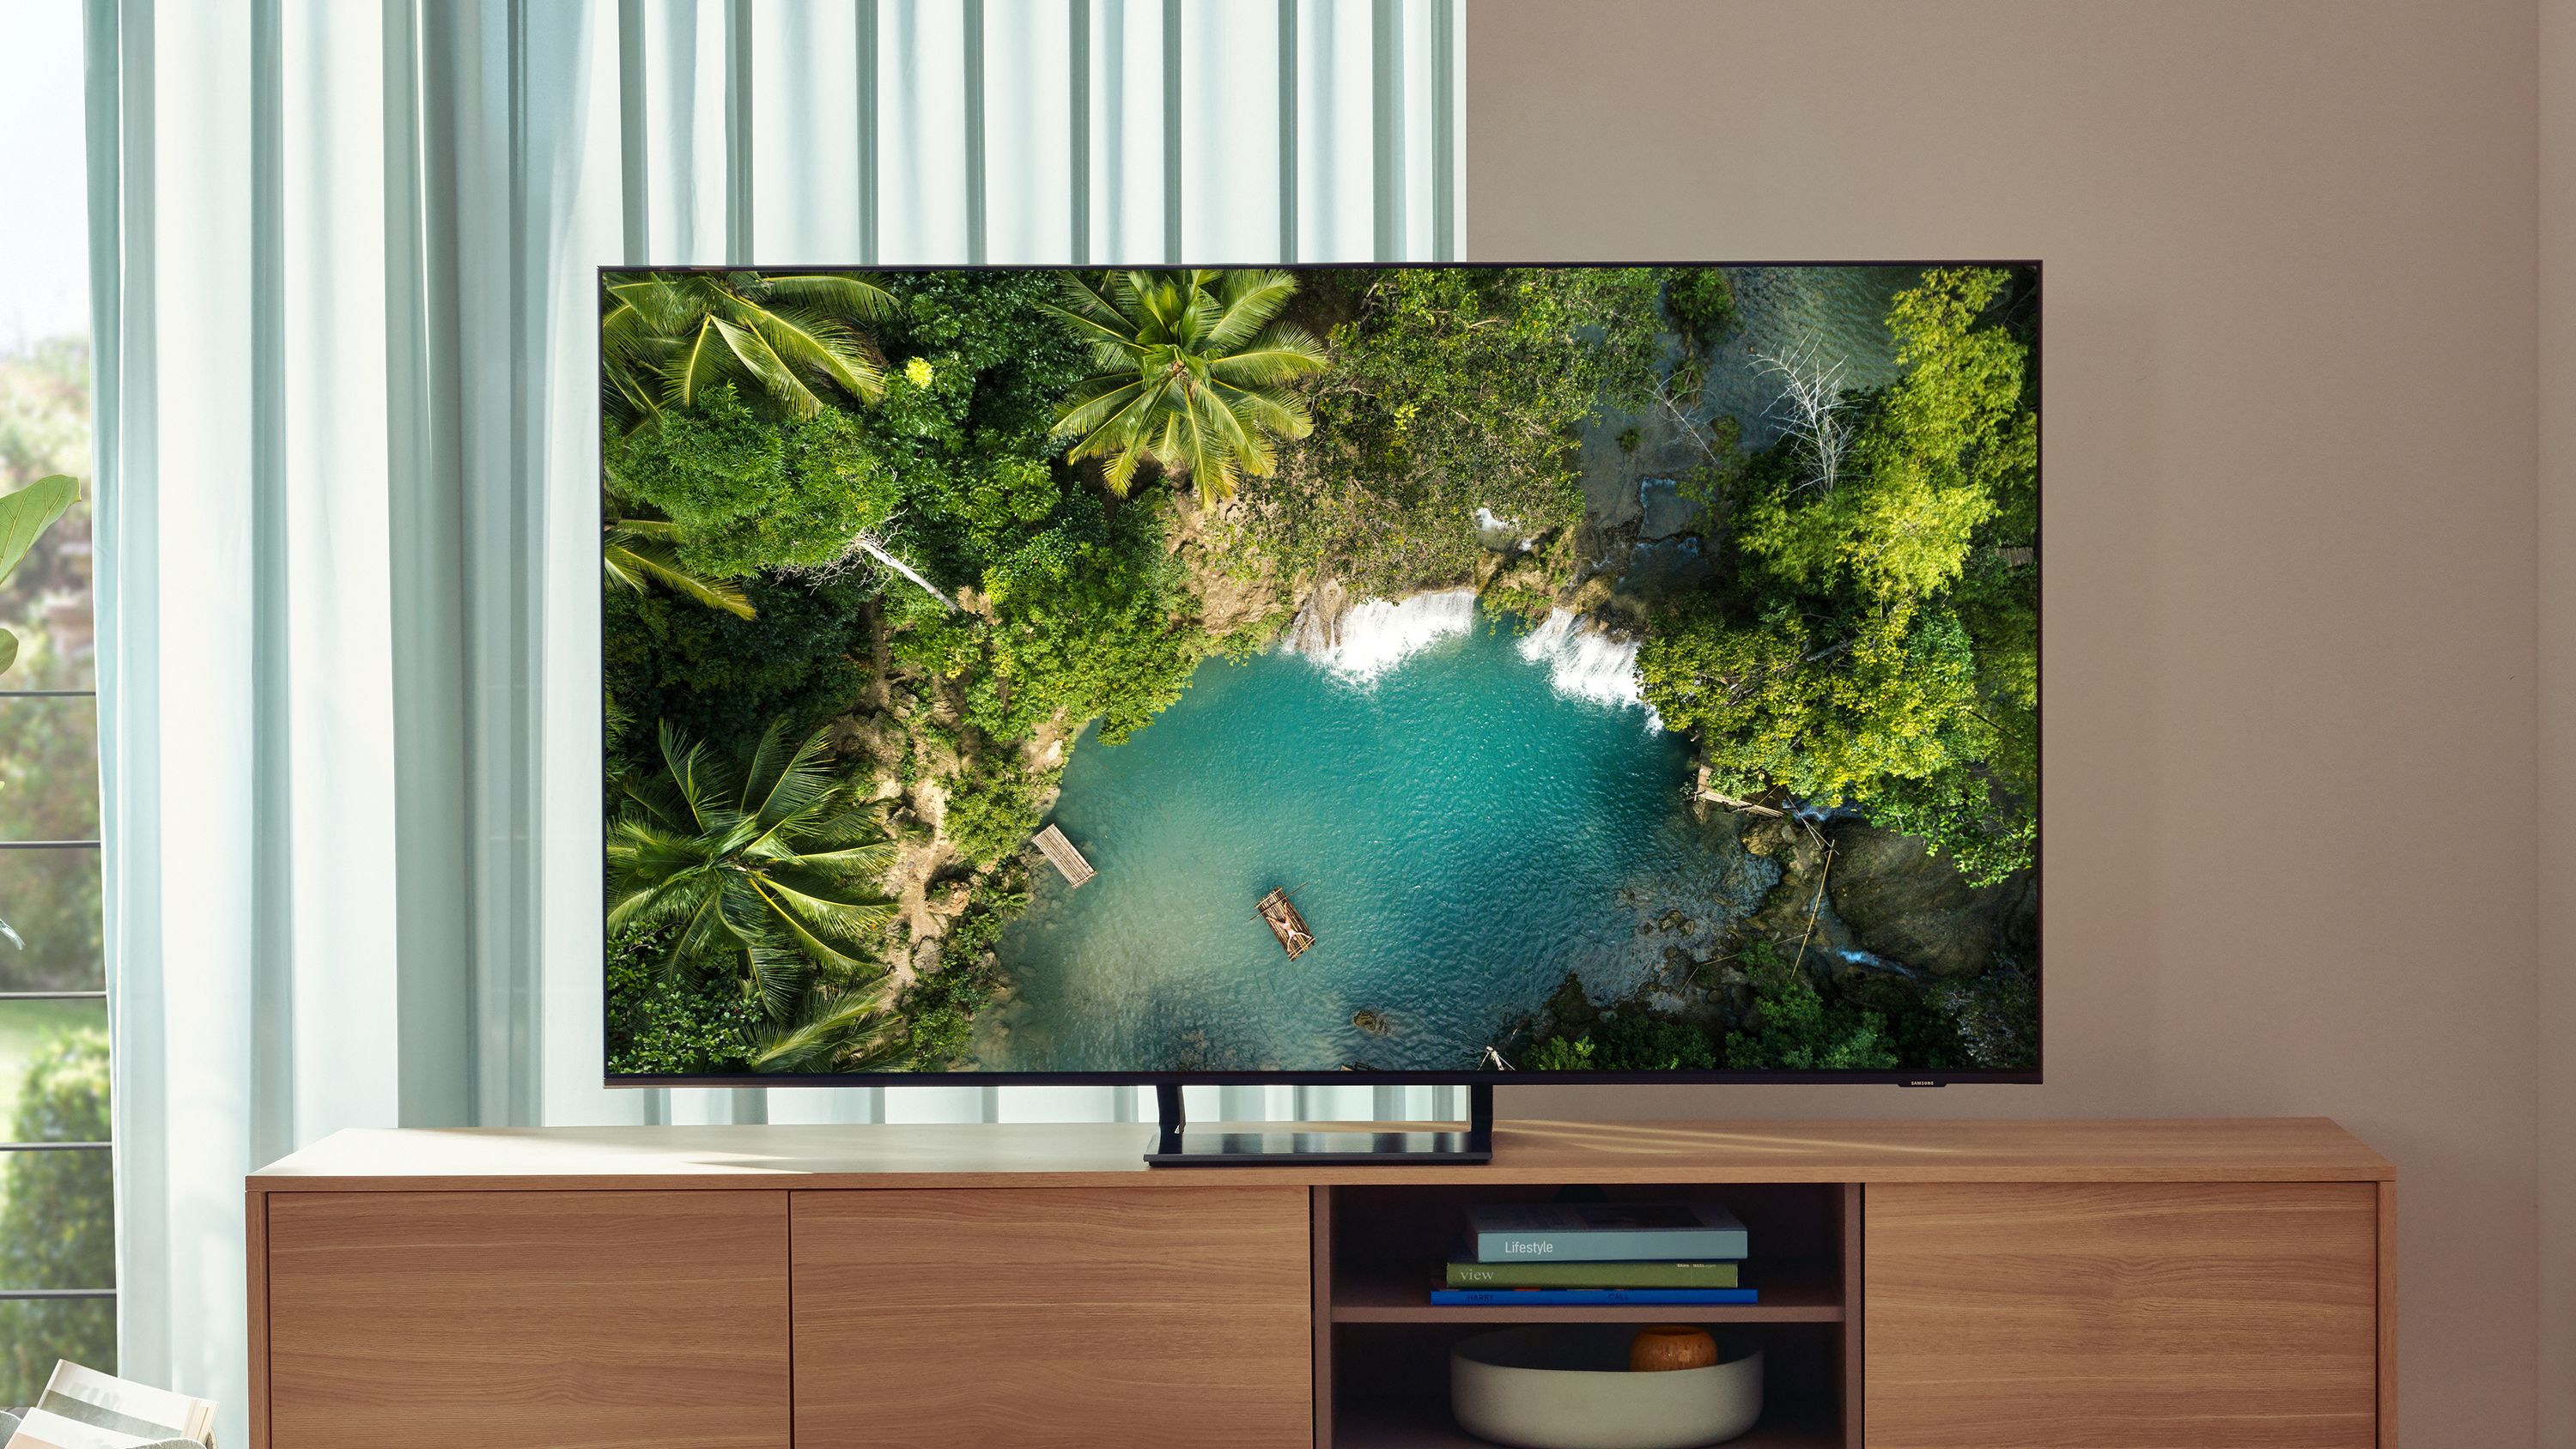 hooi toewijzing Ik zie je morgen The best 48, 49 and 50-inch TVs in 2022 for all budgets | T3